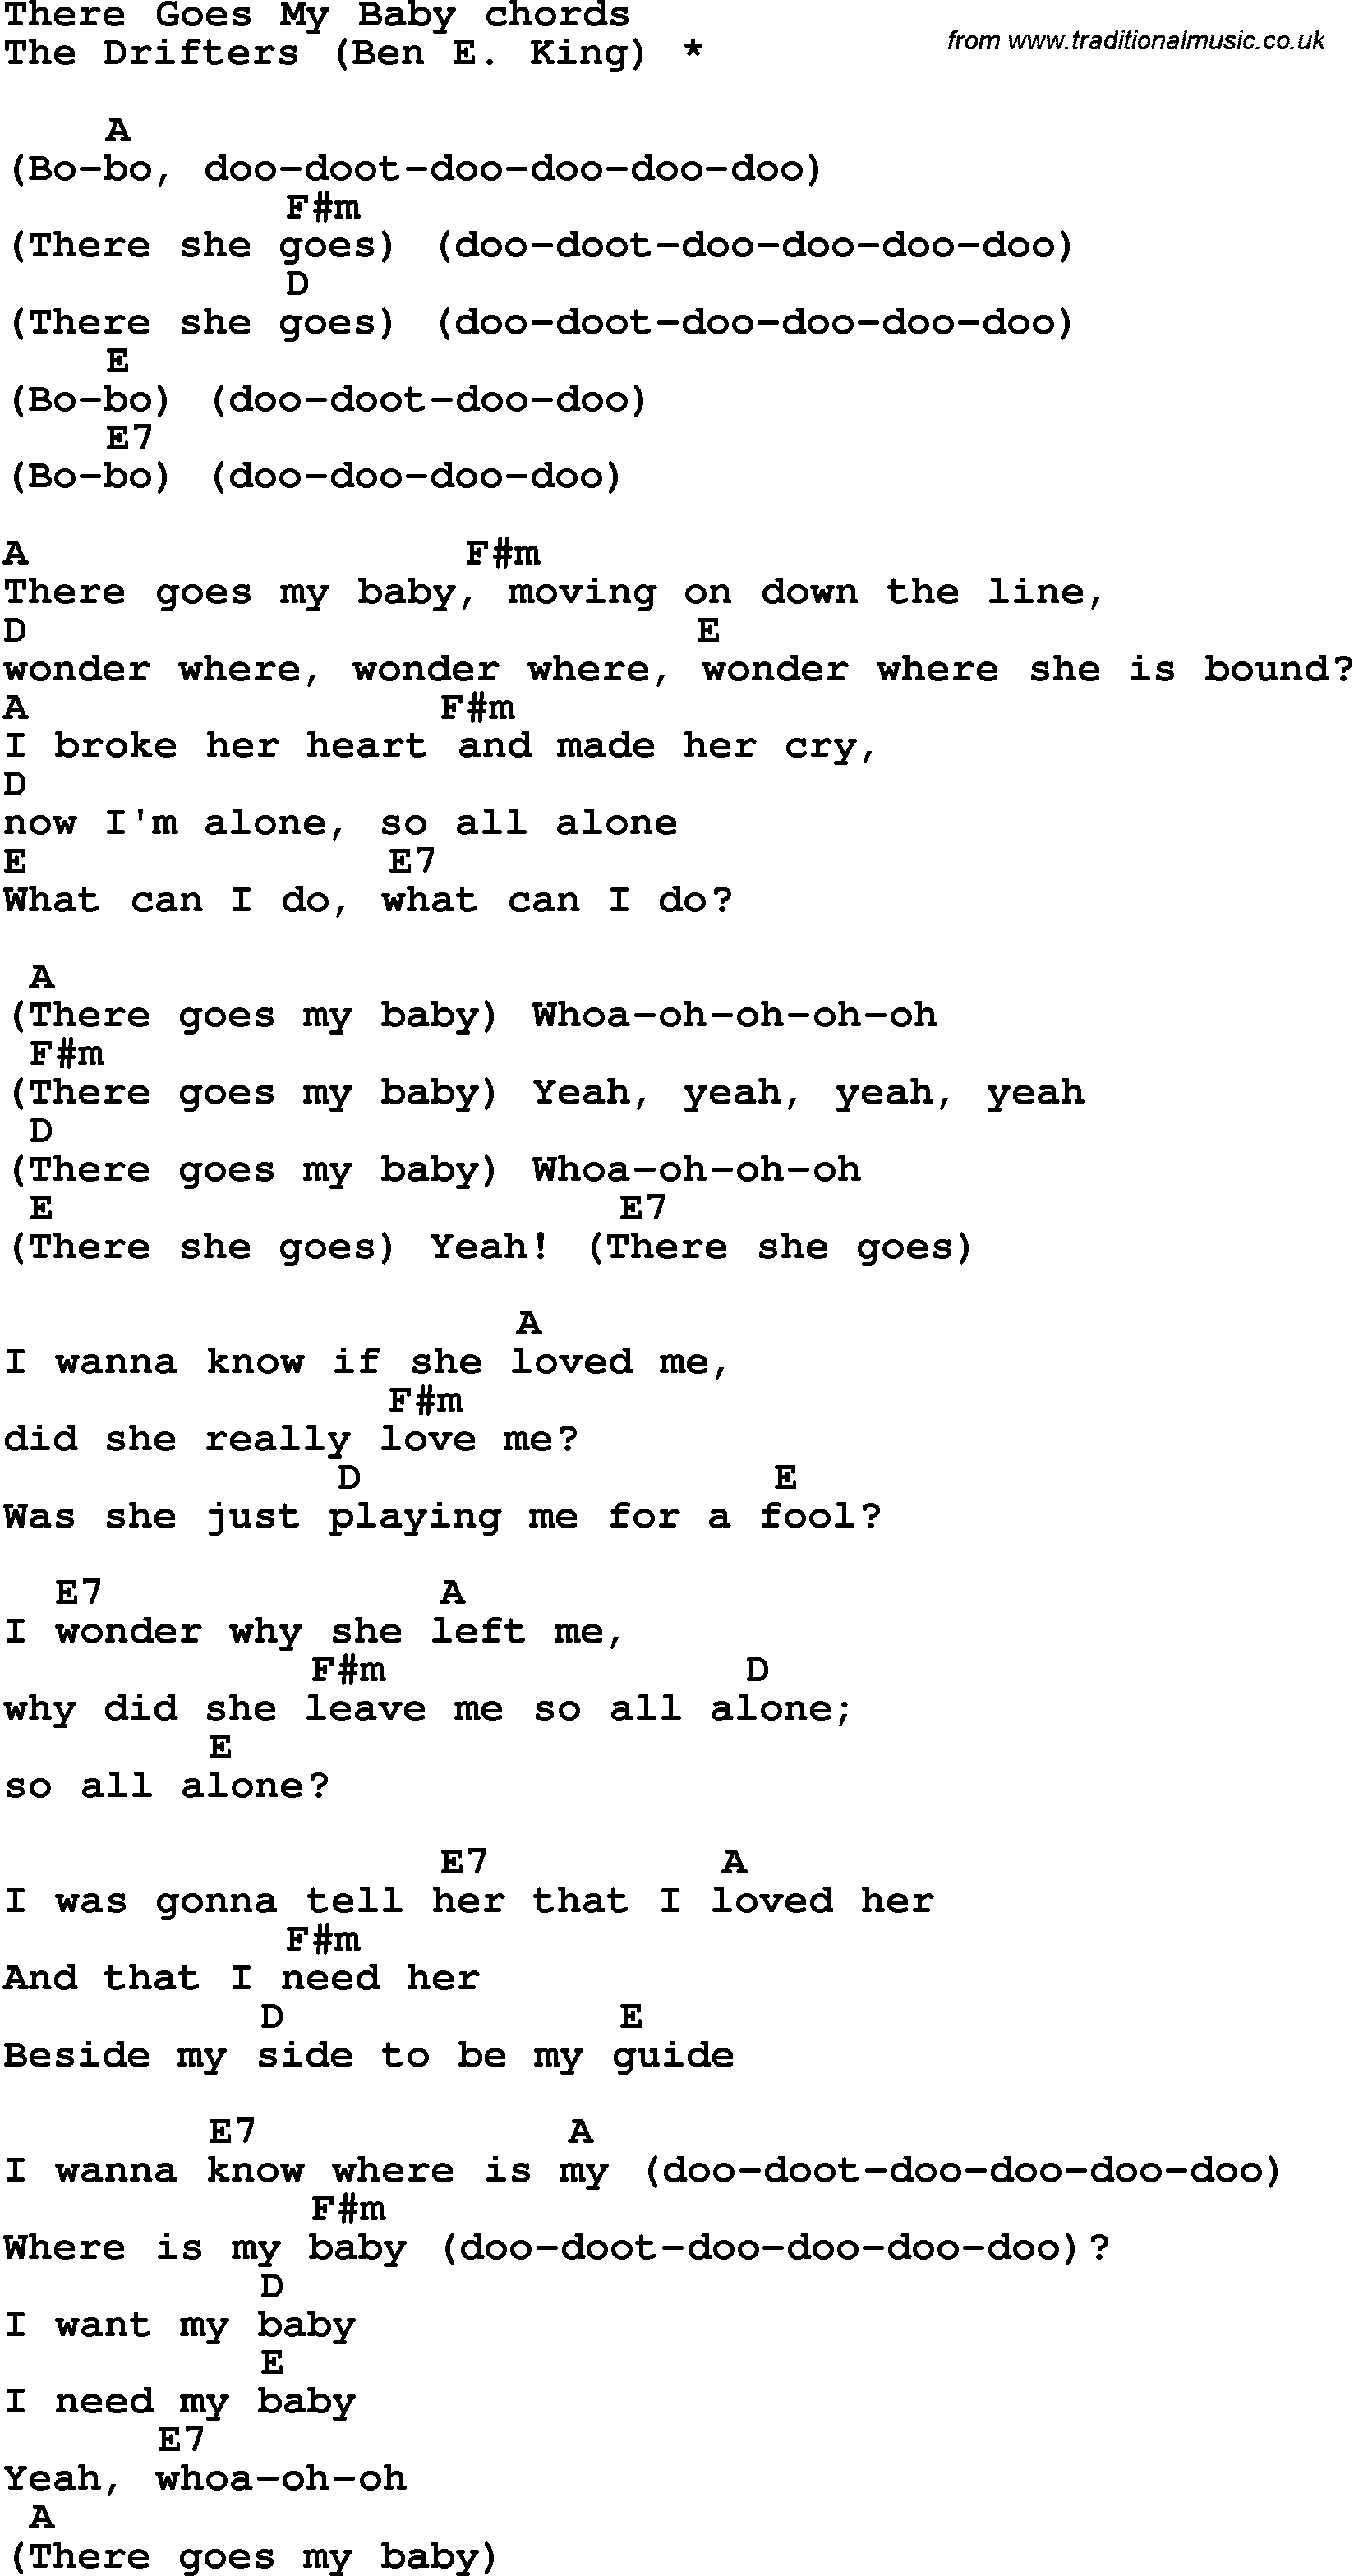 Song Lyrics with guitar chords for There Goes My Baby - The Drifters